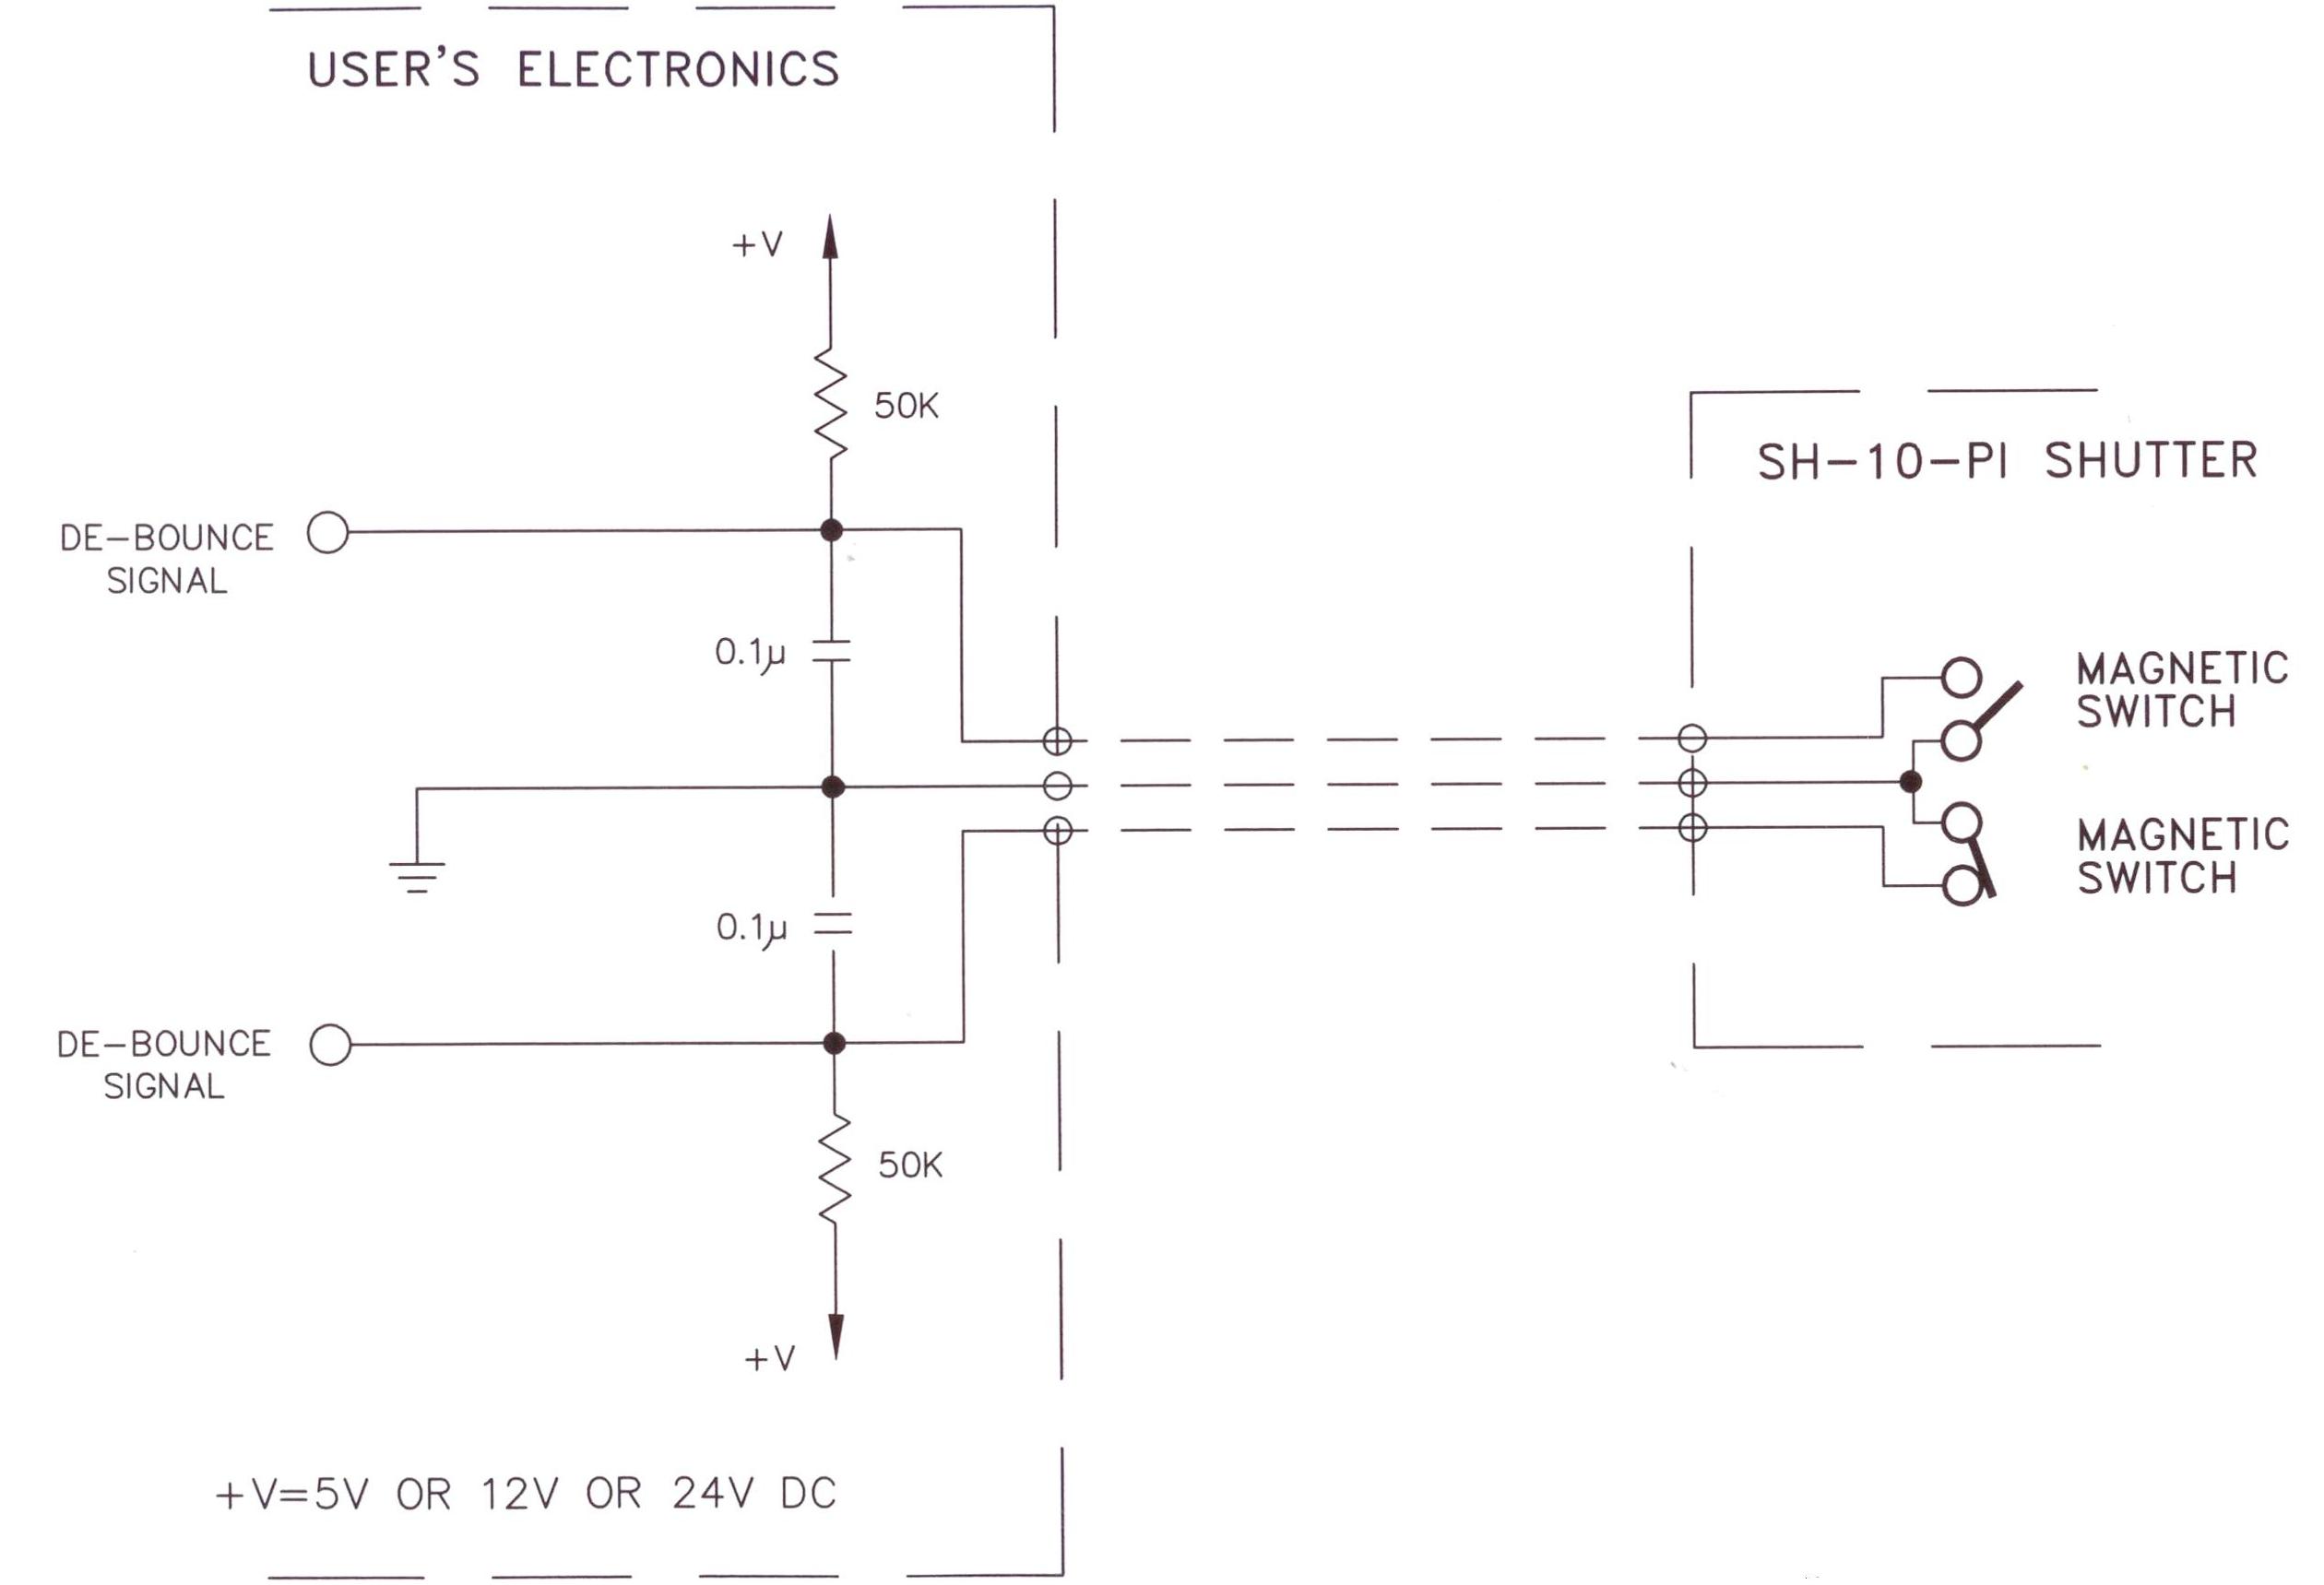 RECOMMENDED DE-BOUNCING CIRCUIT FOR SH-10-PI MAGNETIC SWITCHES